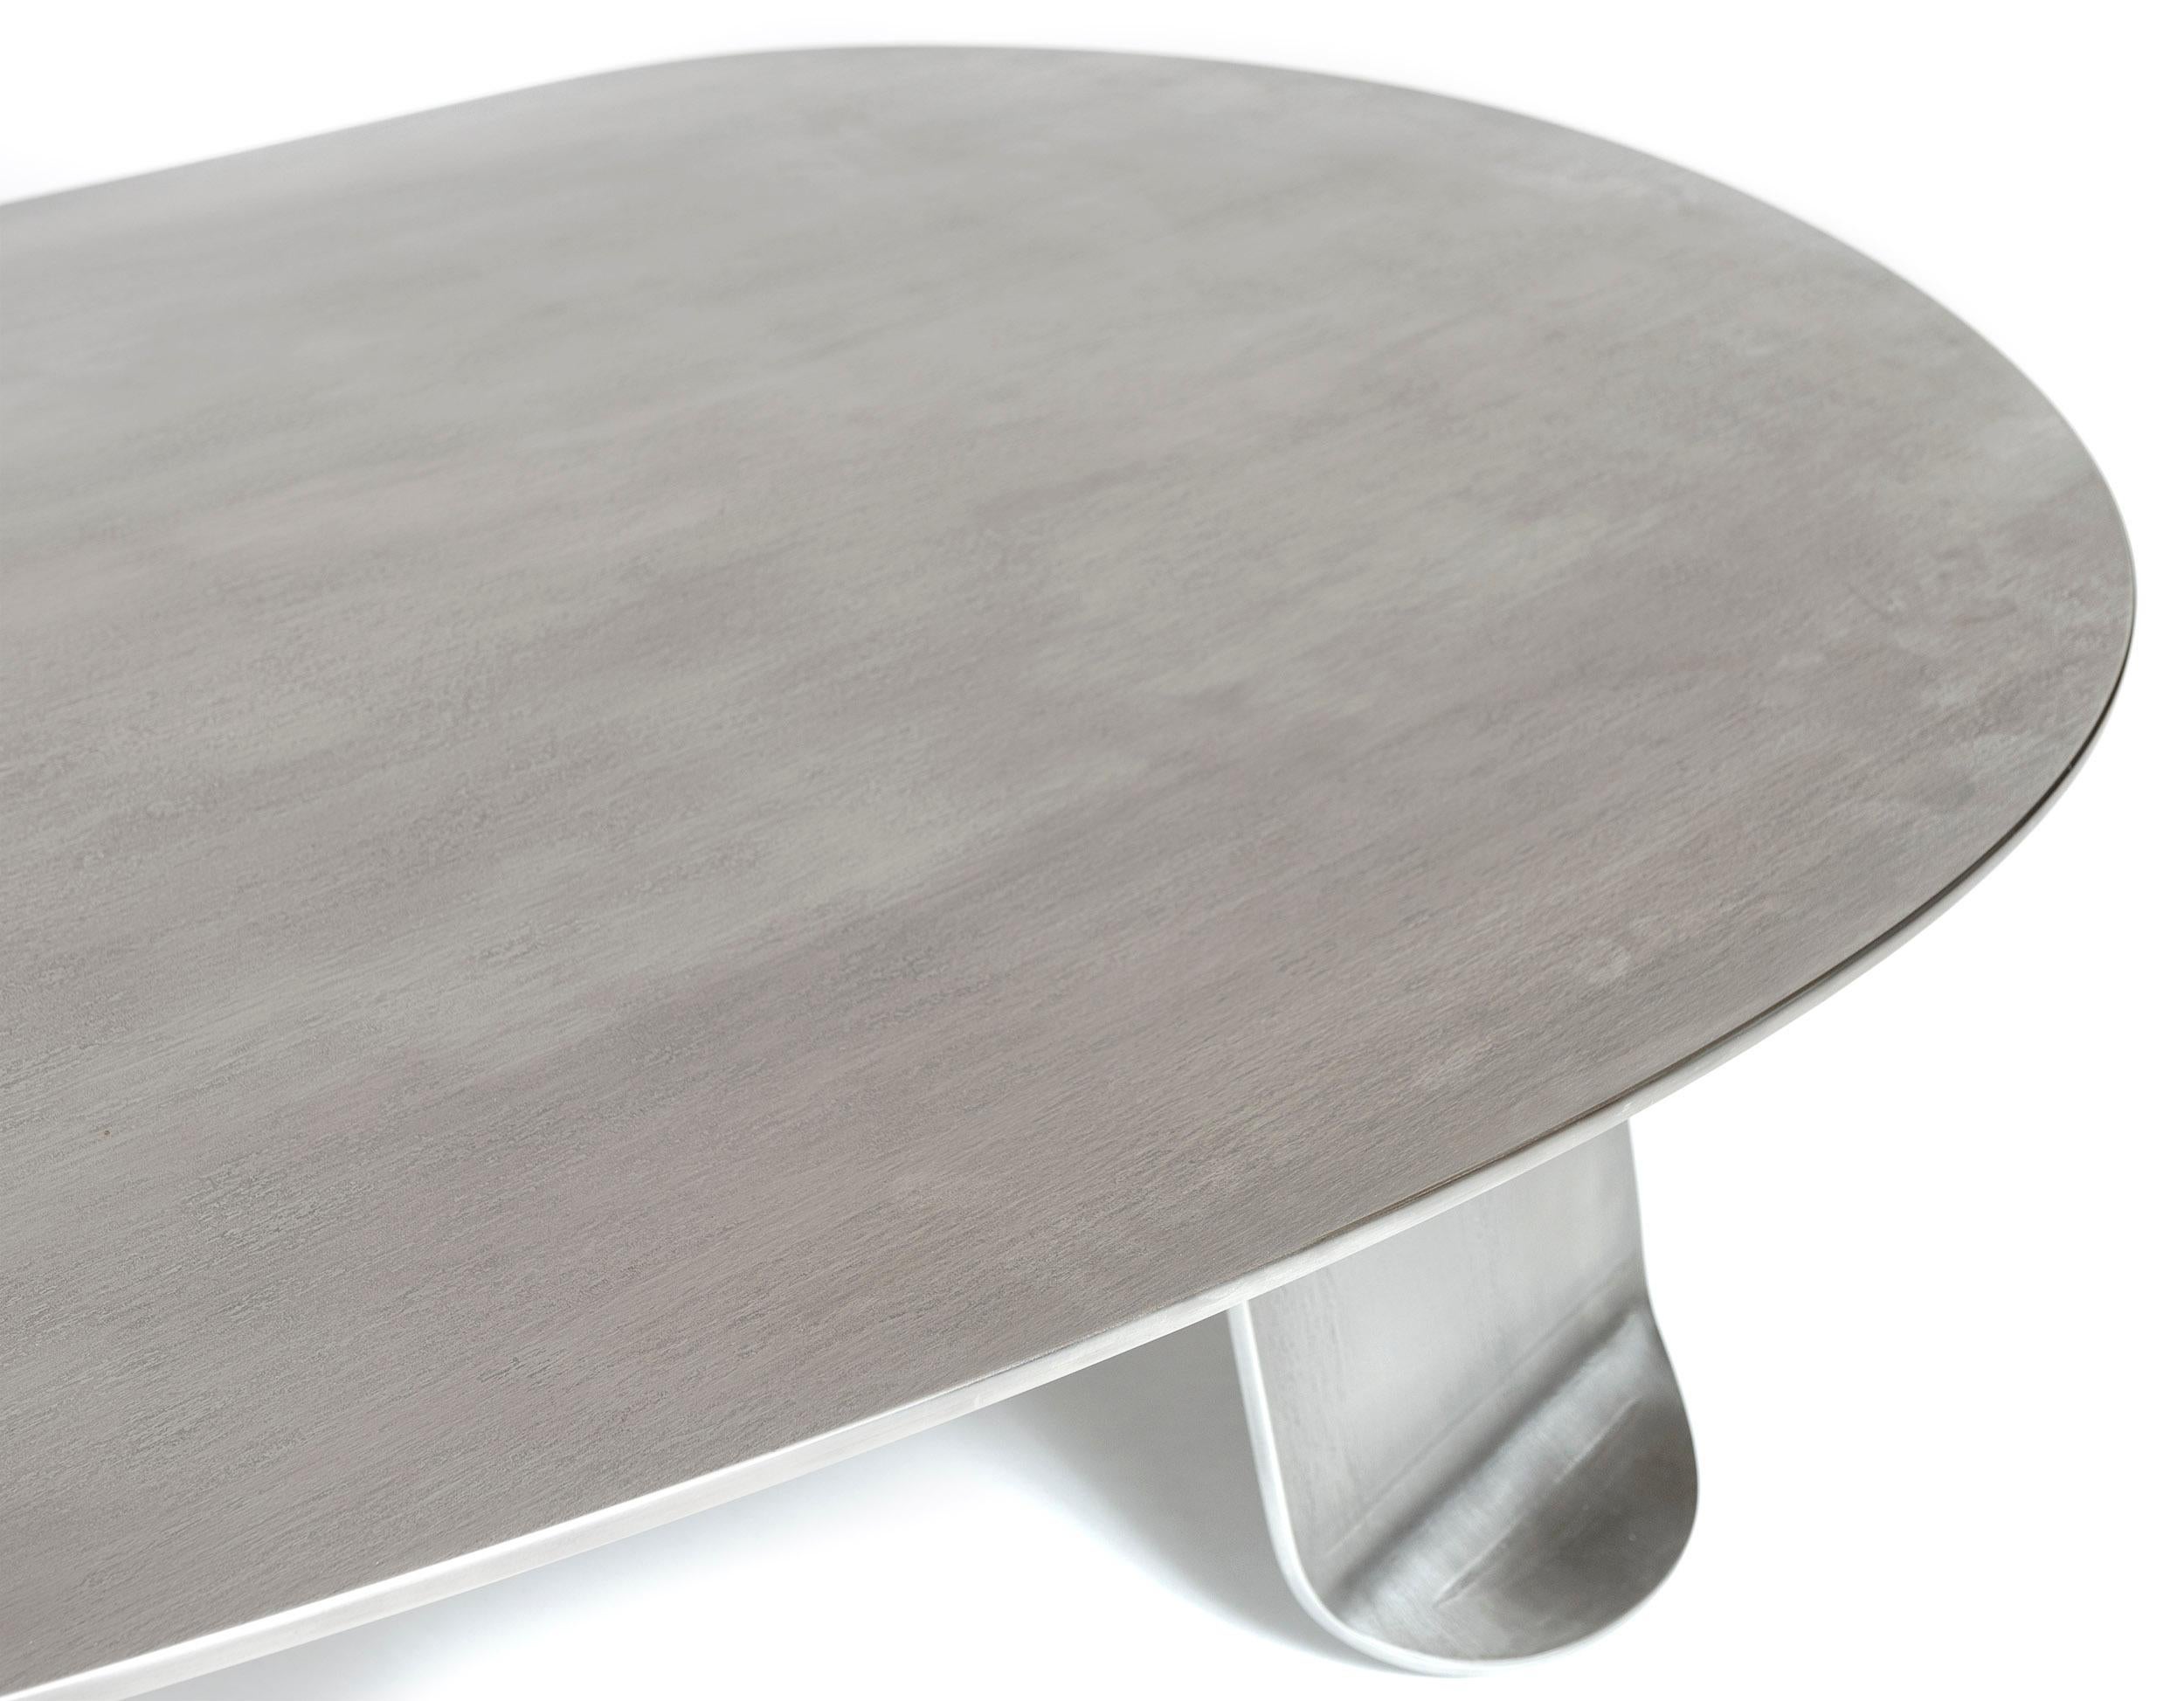 WYETH Chrysalis Table No. 1 in Natural Grain Stainless Steel For Sale 1